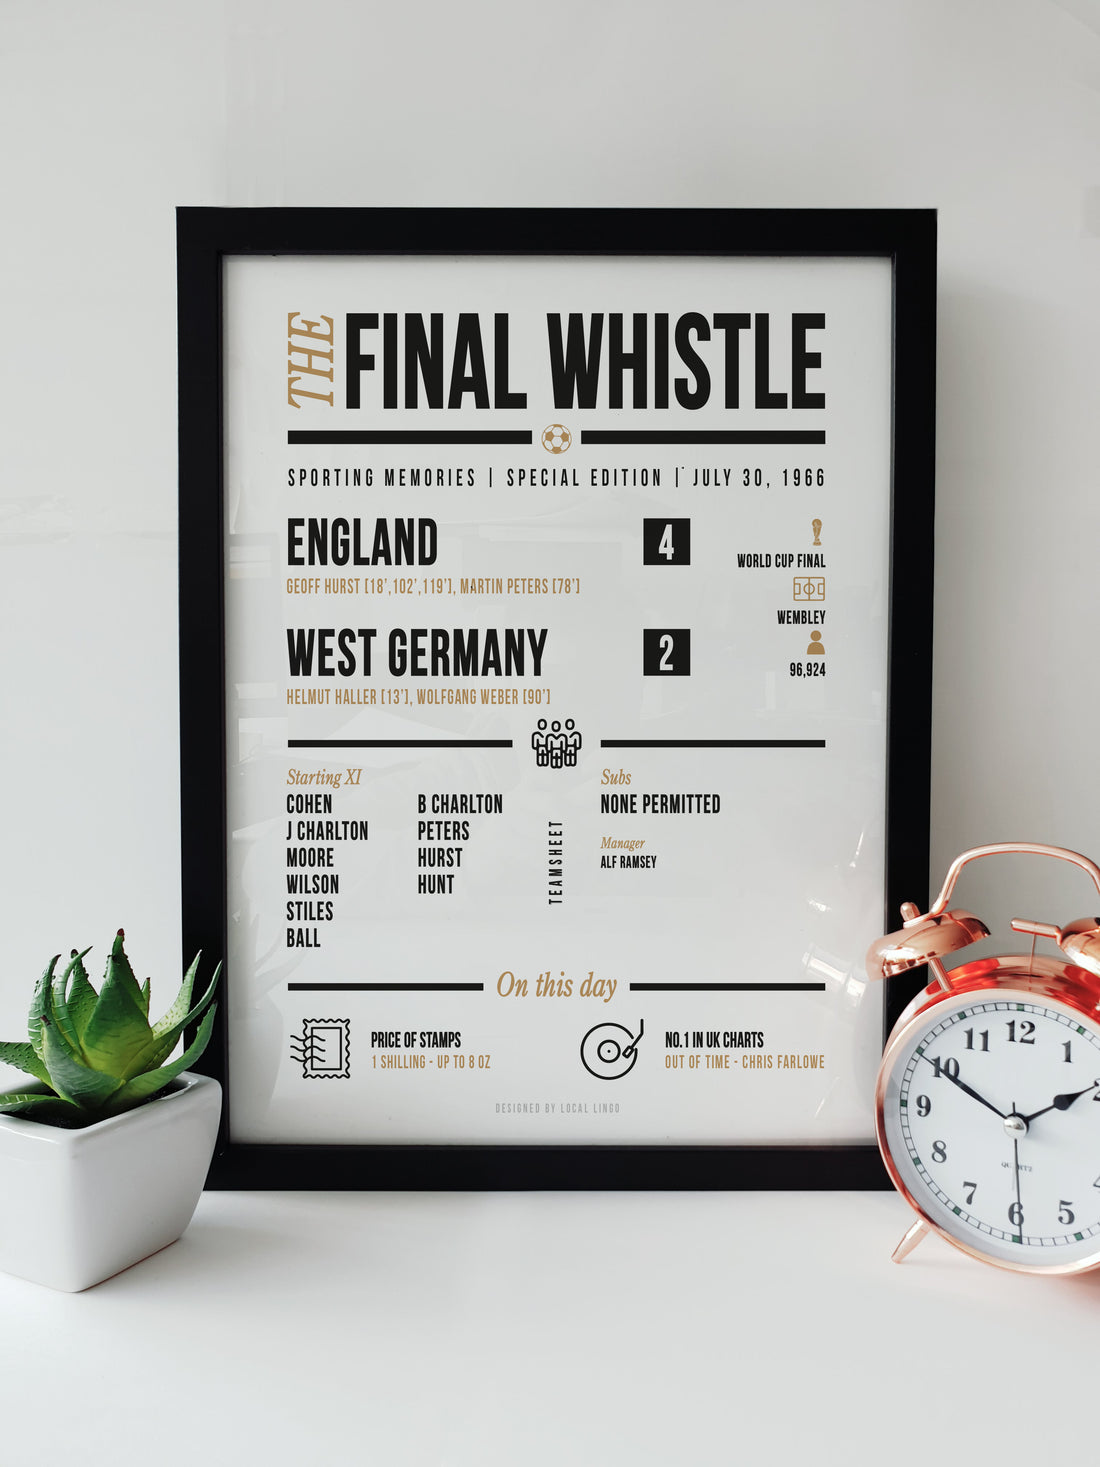 England vs West Germany 1966 World Cup Final commemorative print with match details, part of The Final Whistle collection by Local Lingo